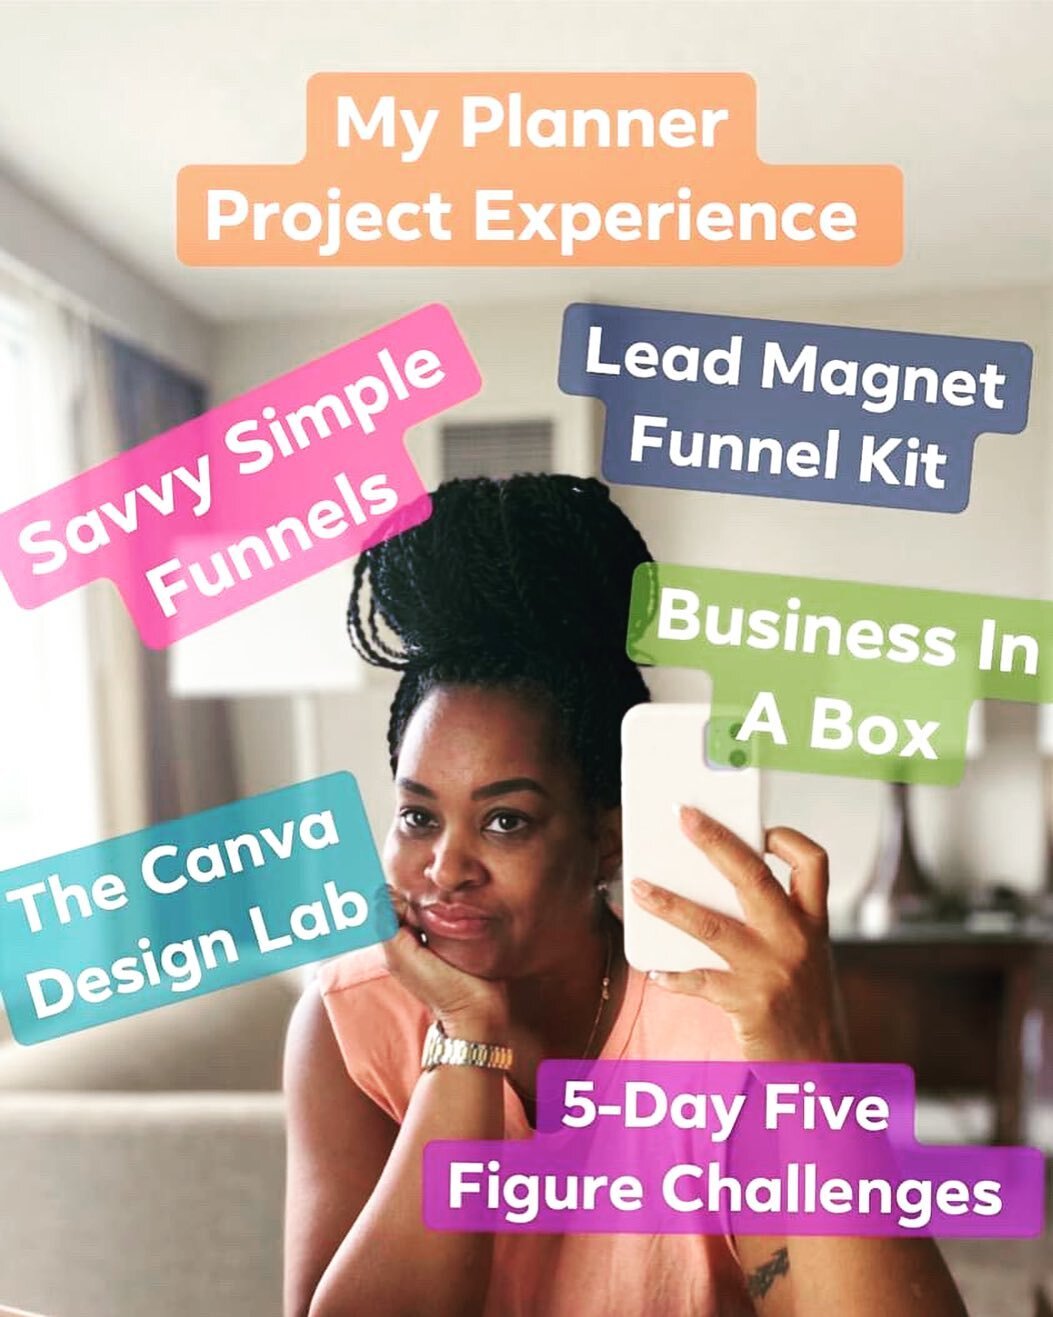 Digital products for the win! 

Do you create and sell digital products?
.
.
.
.
.
.
 #womeninbusiness #femalehustler #bossbabe #labtoplifestyle #savvysimplemarketing #bosslady #savvybusinessower #emailmarketing #emailautomation #funnelhacker #listbu